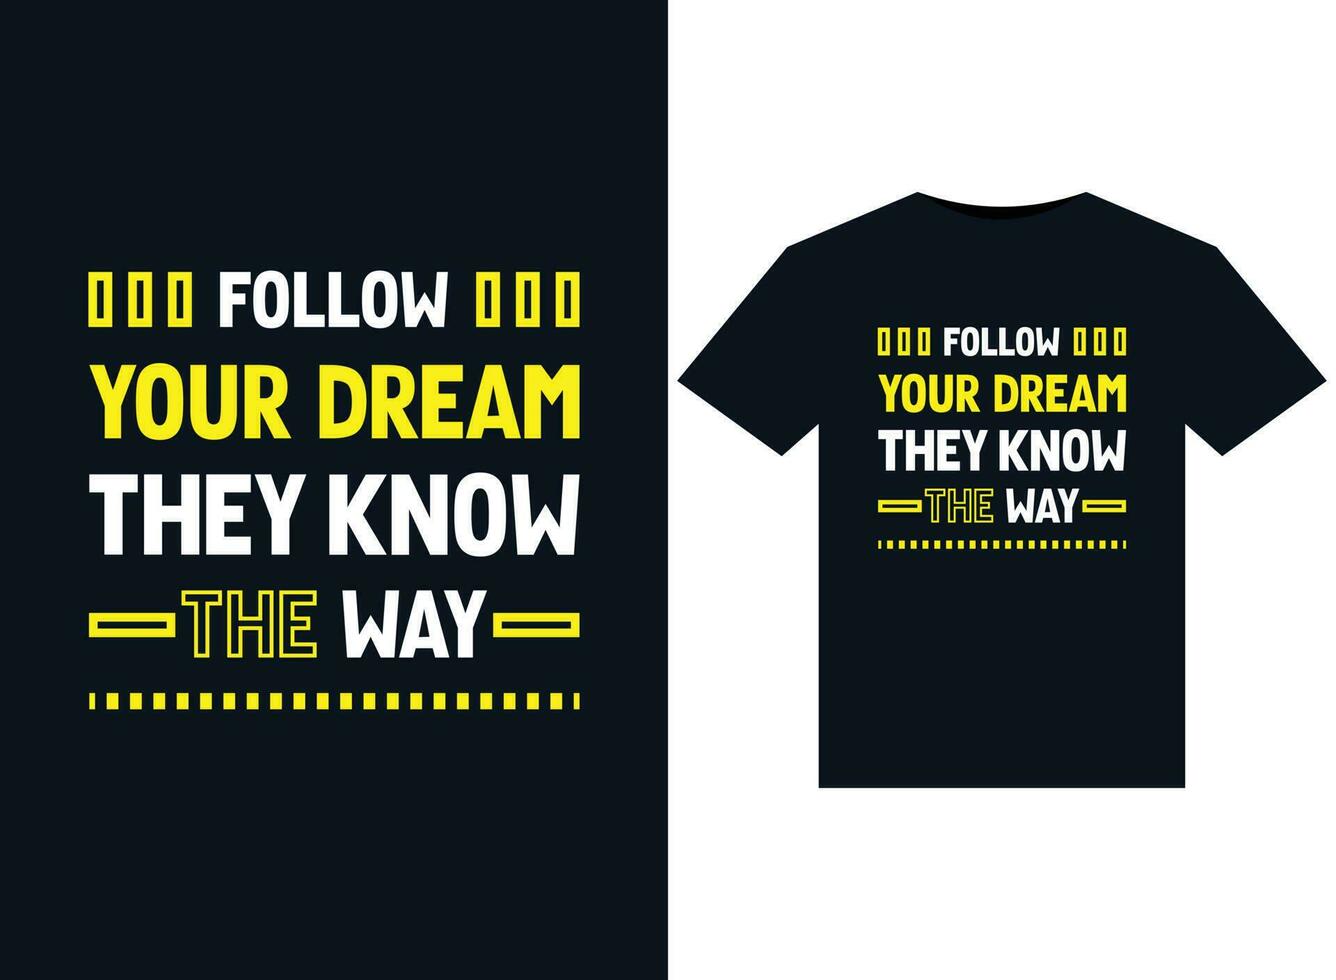 Follow your dream they know the way illustrations for print-ready T-Shirts design vector